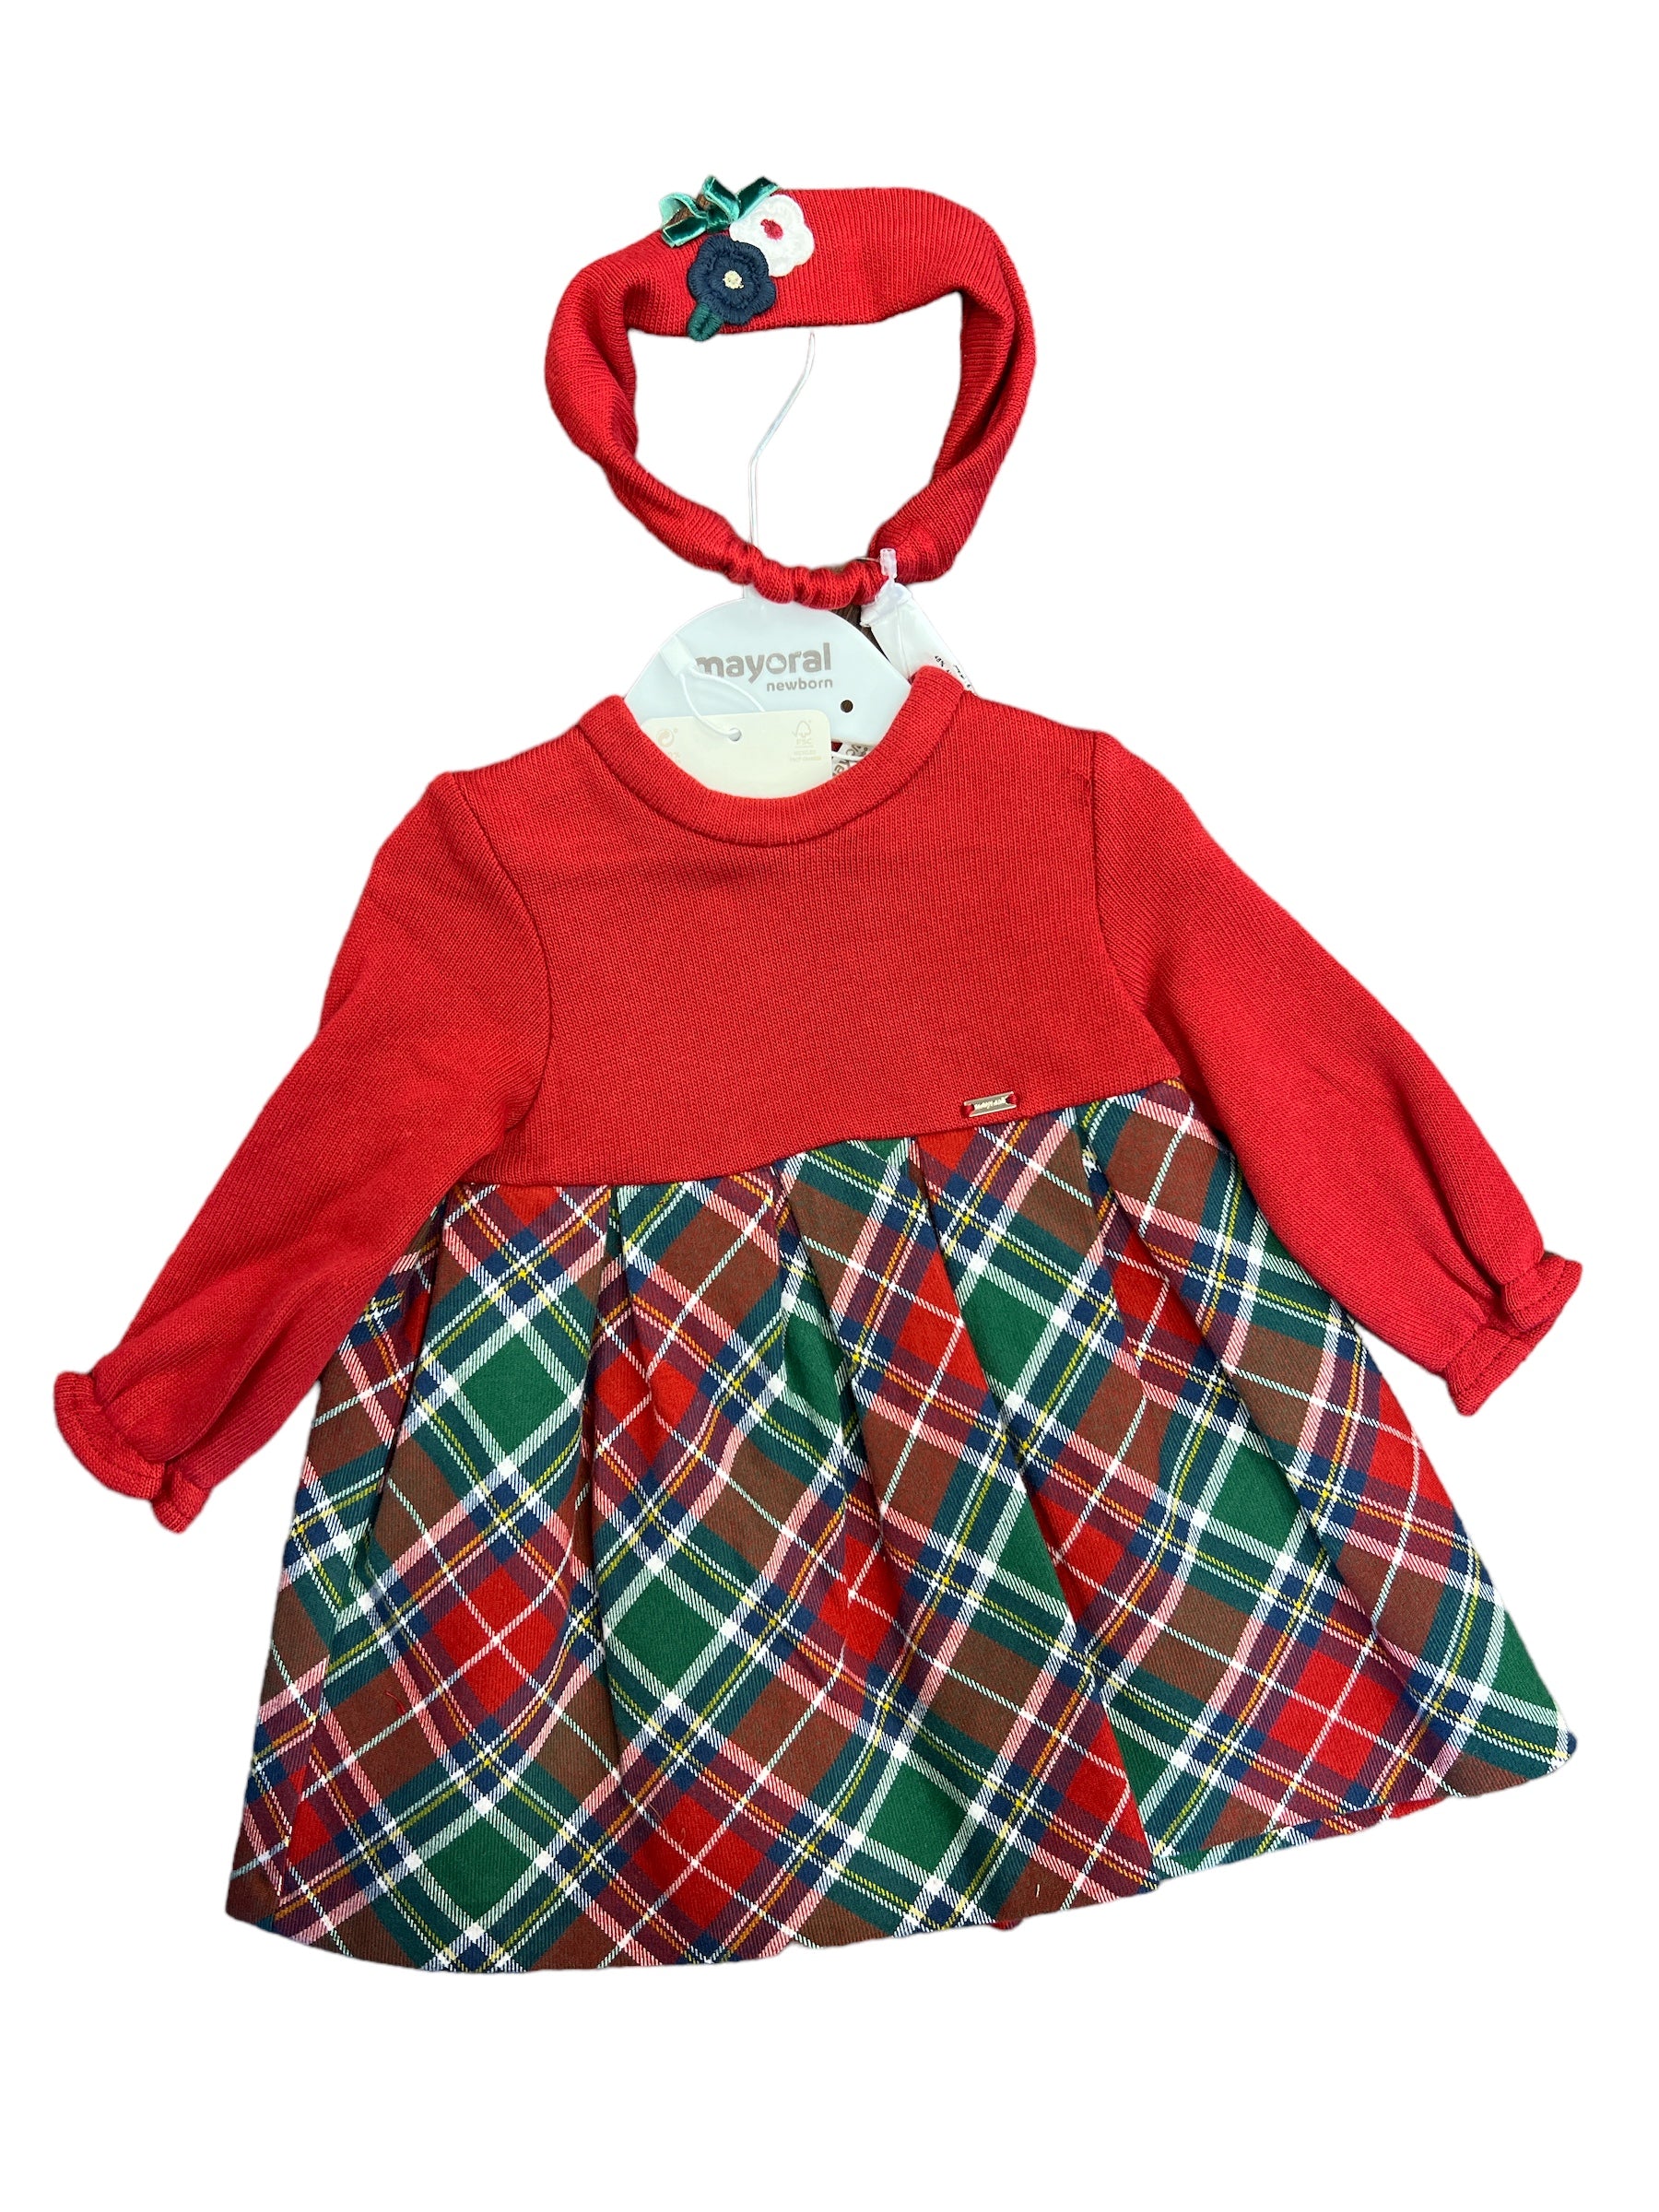 Plaid Knit Dress-520 Baby & Kids Gifts-Simply Stylish Boutique-Simply Stylish Boutique | Women’s & Kid’s Fashion | Paducah, KY